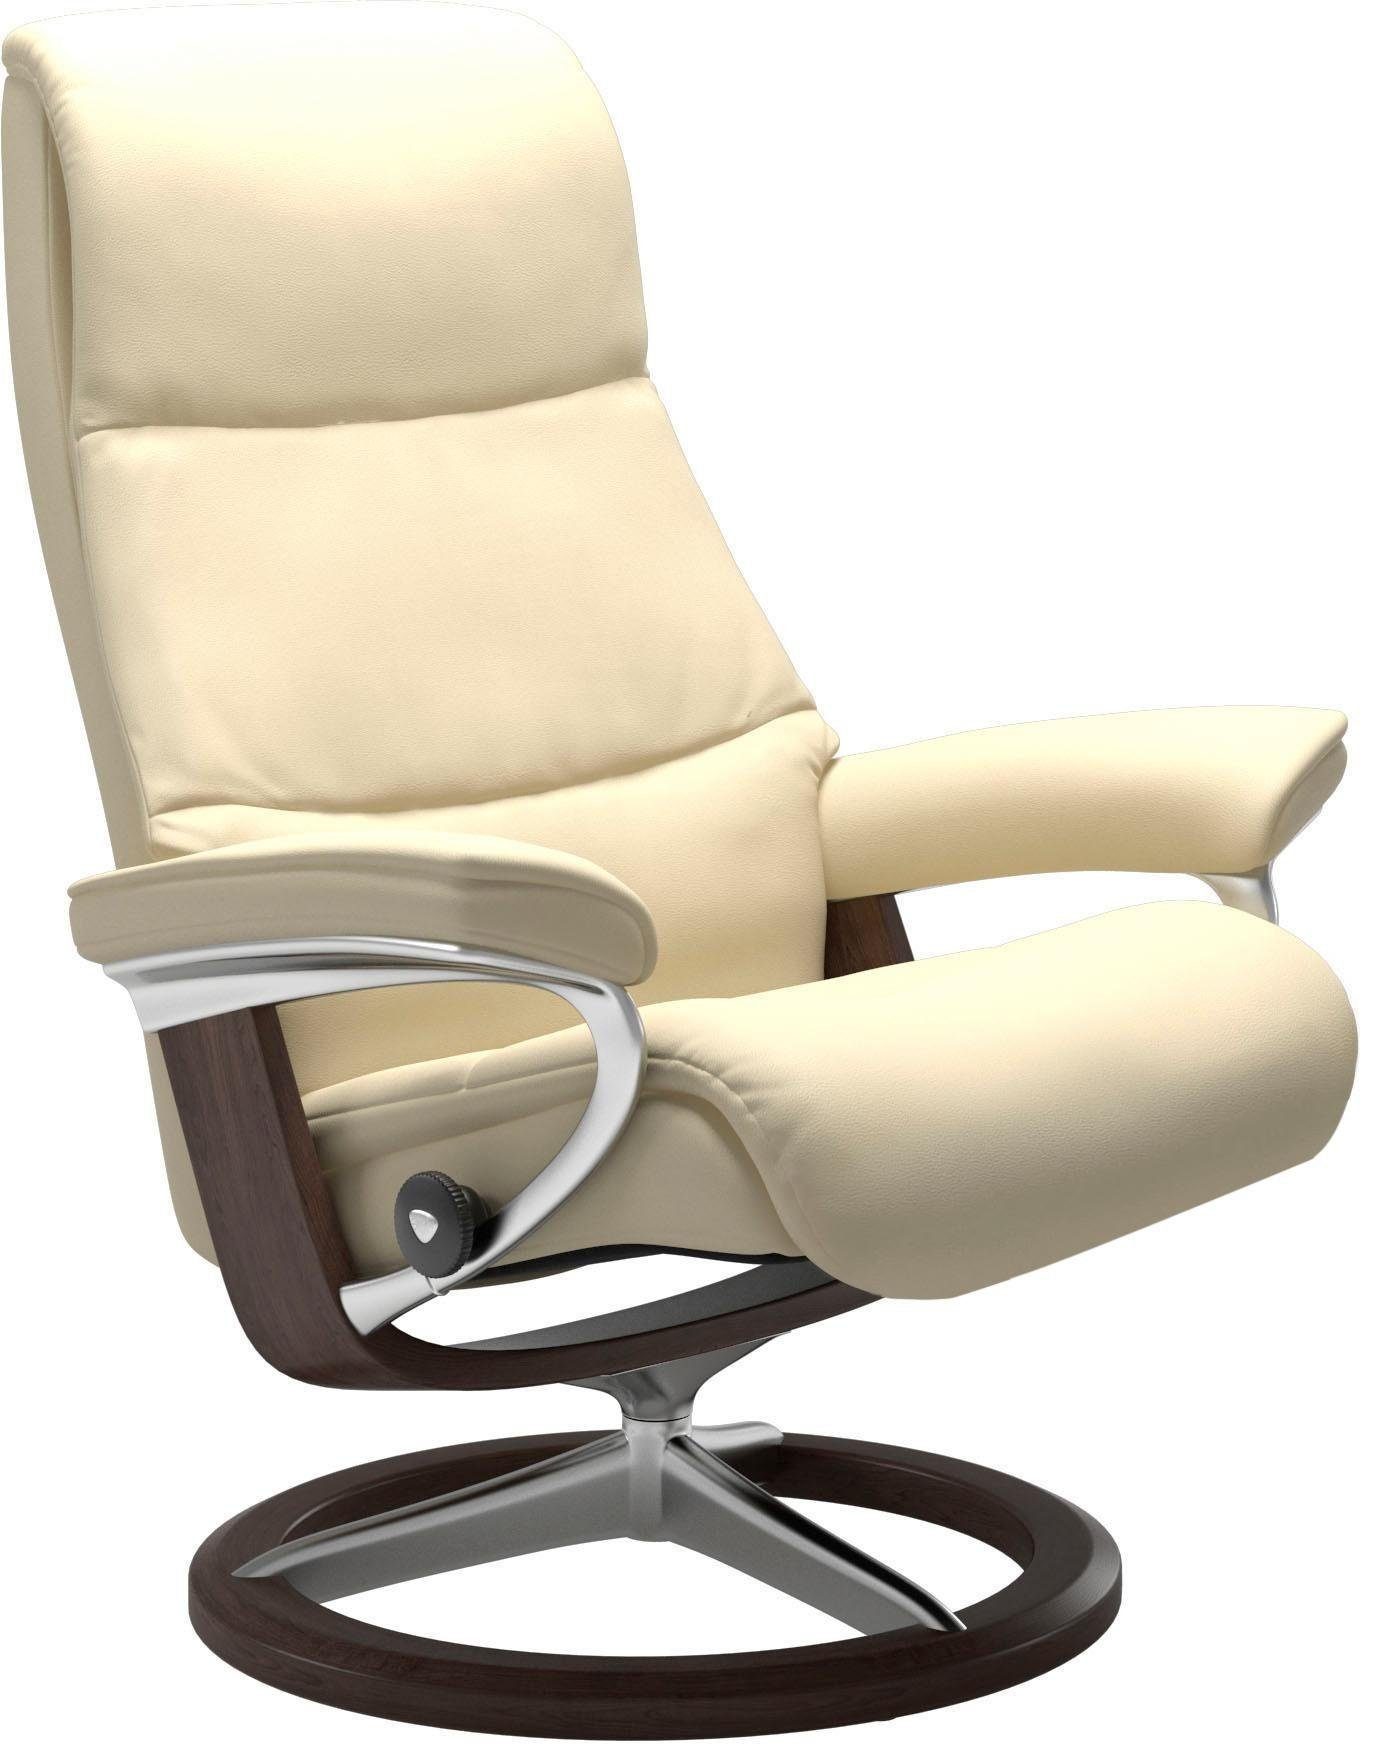 Signature S,Gestell mit View, Stressless® Wenge Größe Relaxsessel Base,